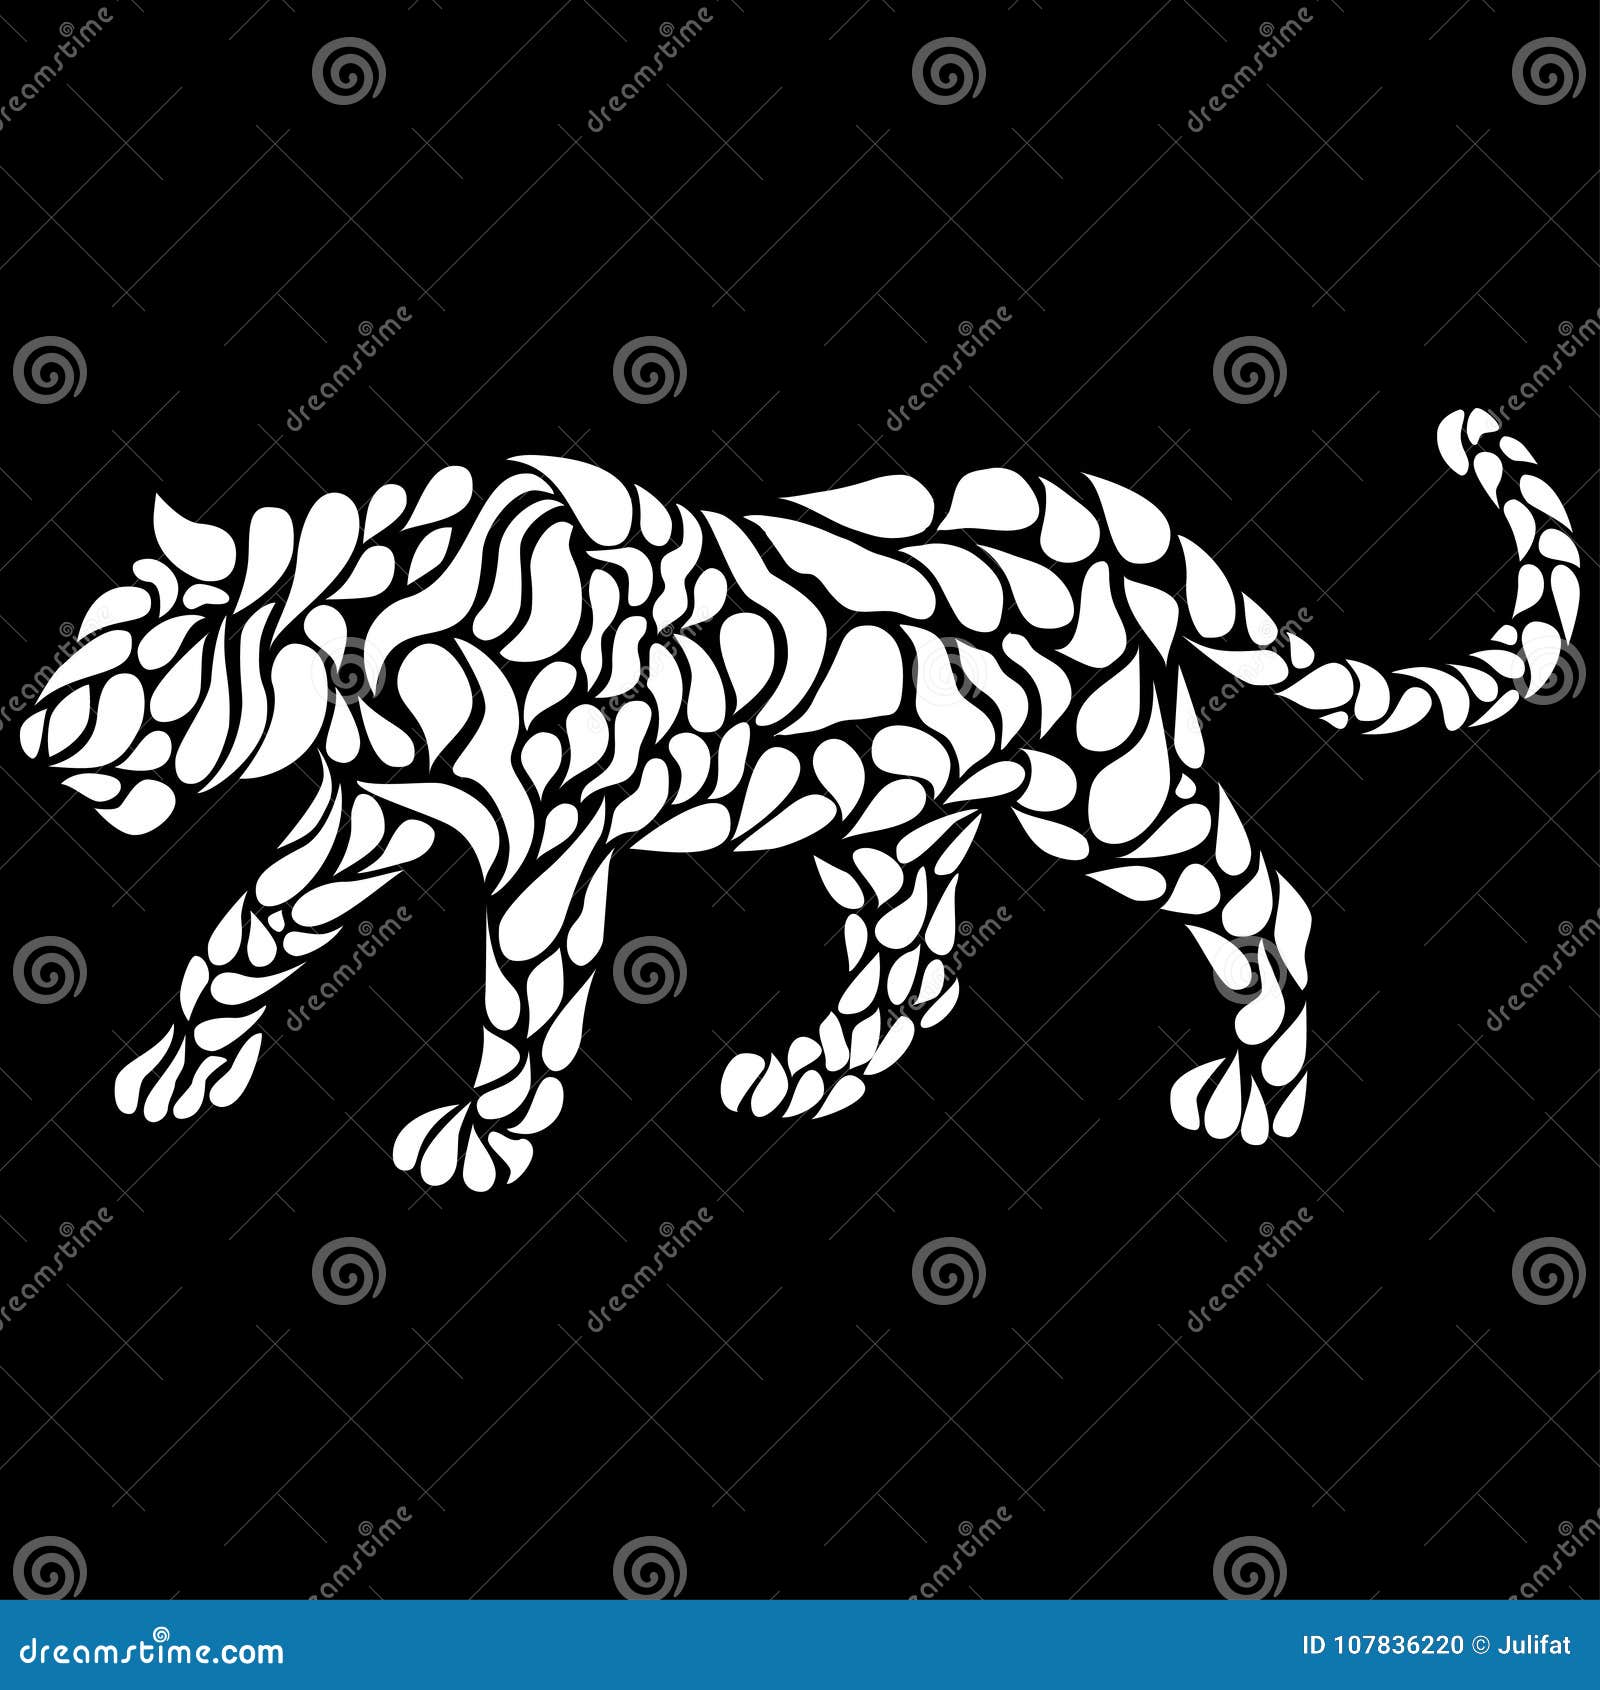 Panther Tattoos Meanings Tattoo Designs  Ideas  Panther tattoo Black  panther tattoo Leopard tattoos